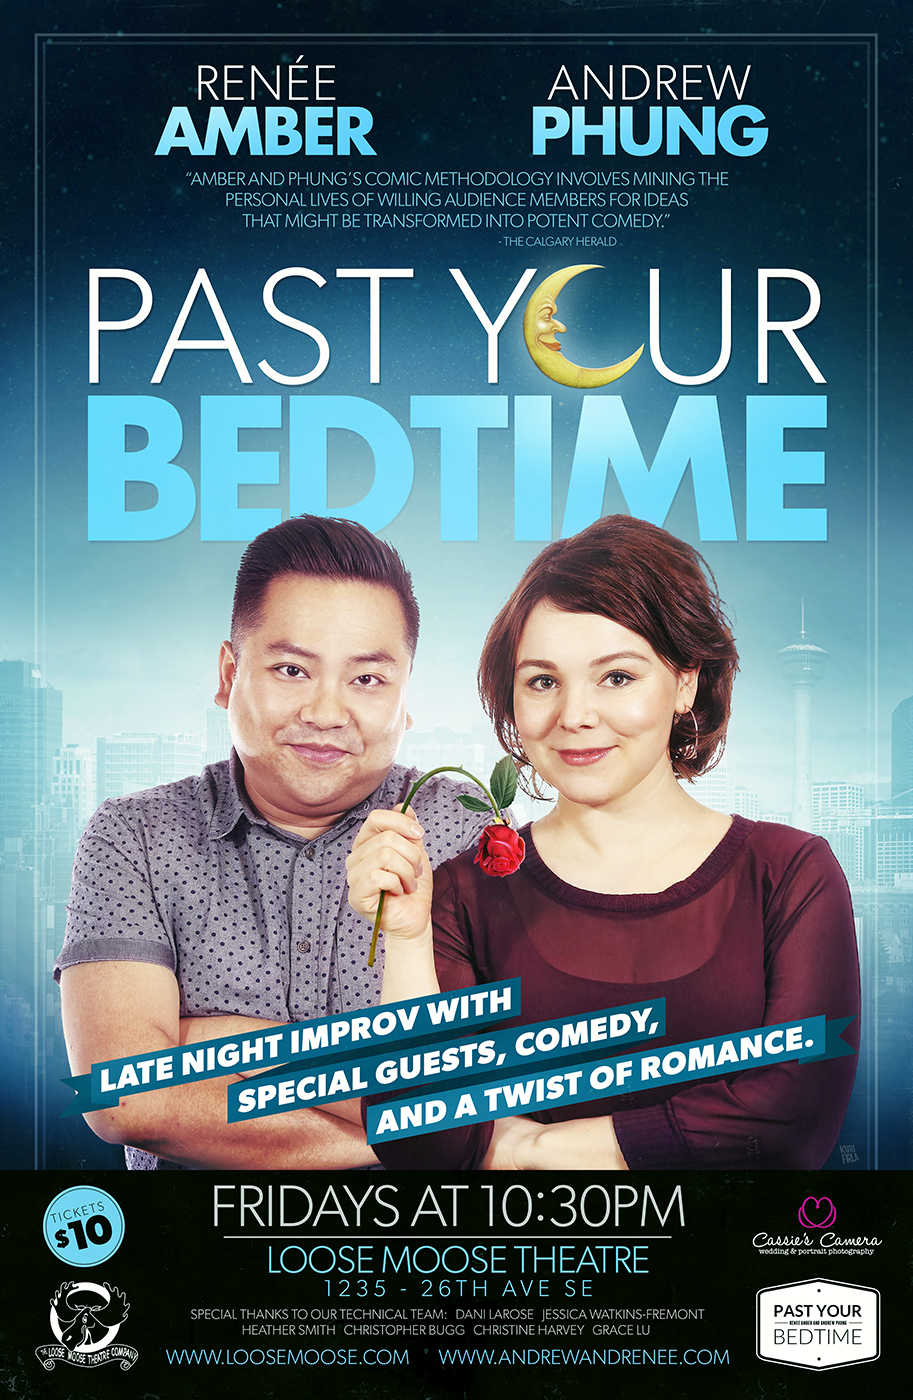 PAST_YOUR_BEDTIME_POSTER_NO_DATES_Web Friendly.jpg